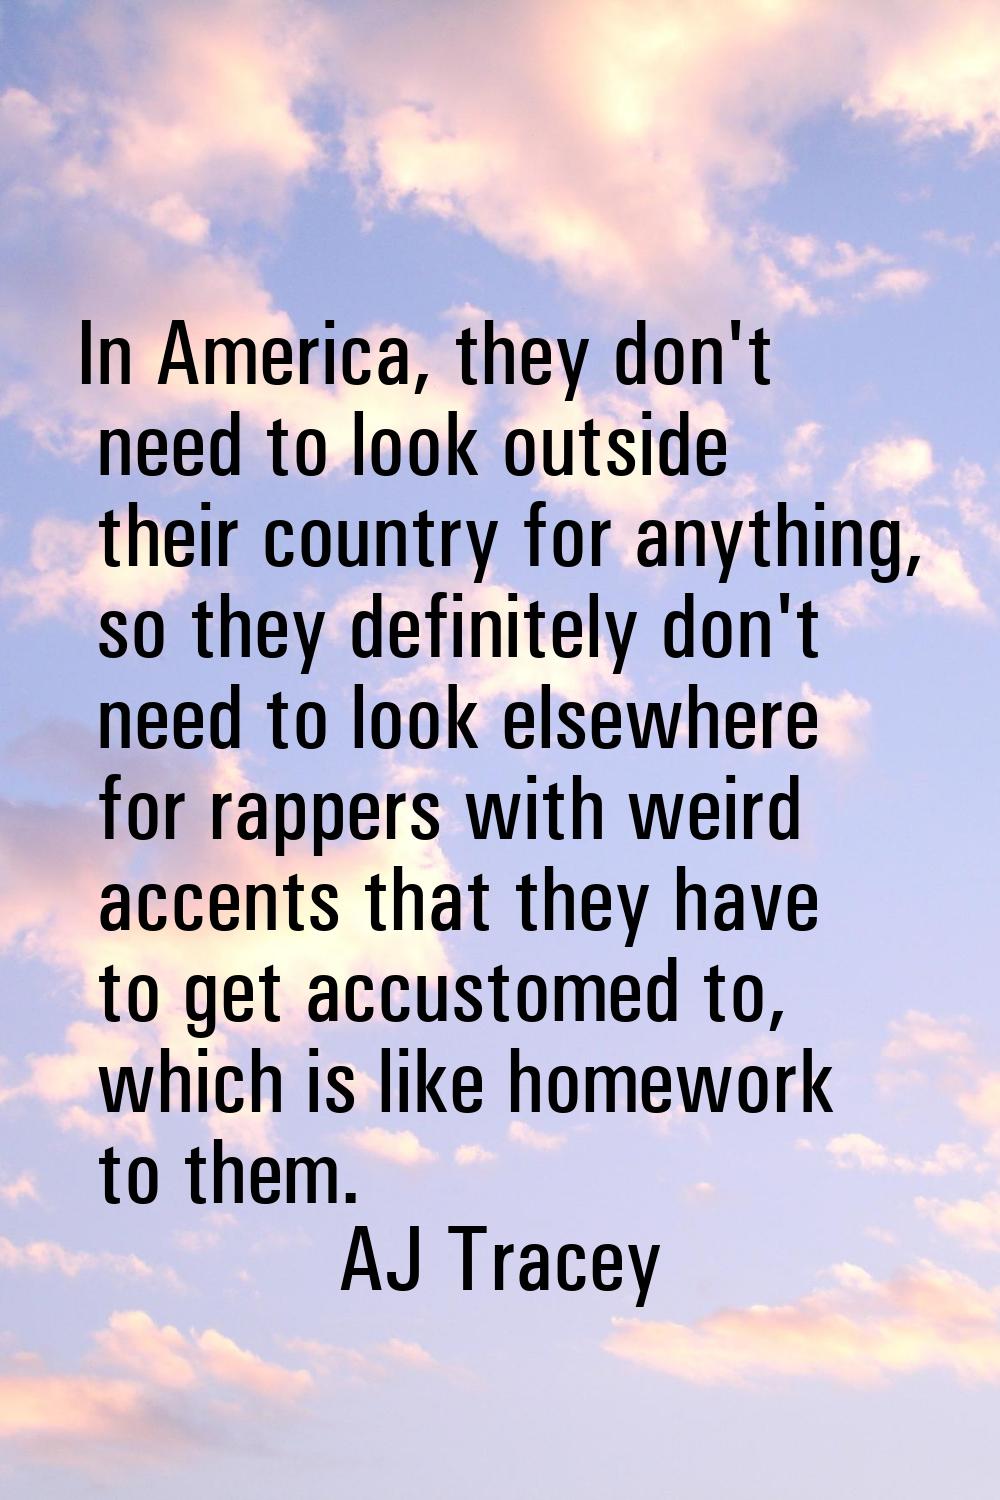 In America, they don't need to look outside their country for anything, so they definitely don't ne